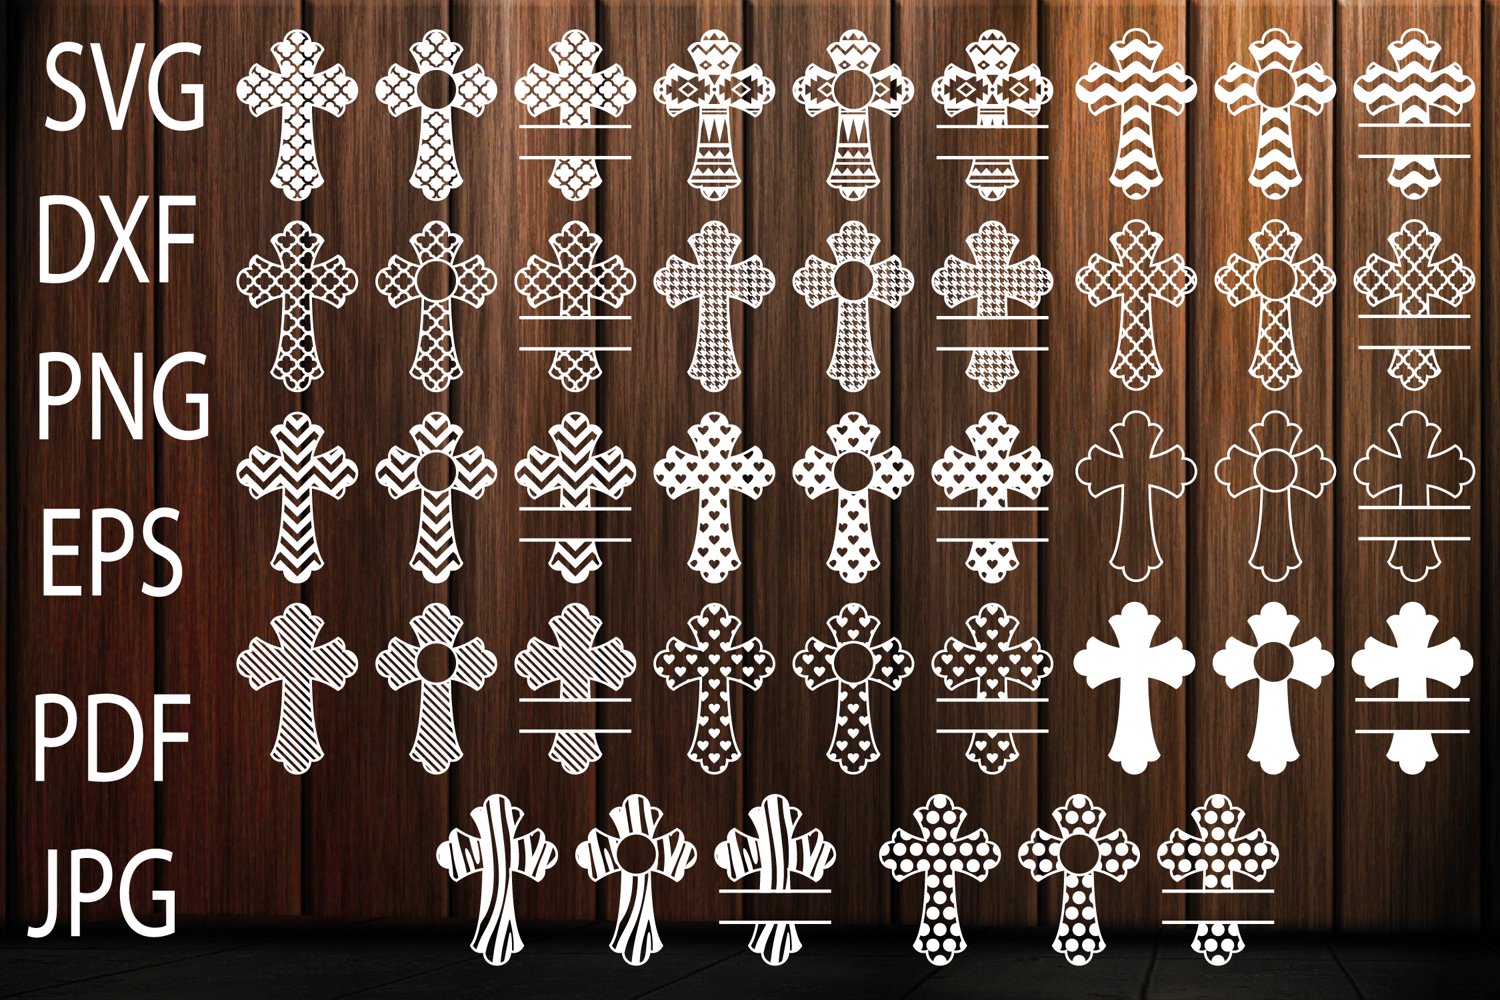 Cover image of Patterned Cross SVG.